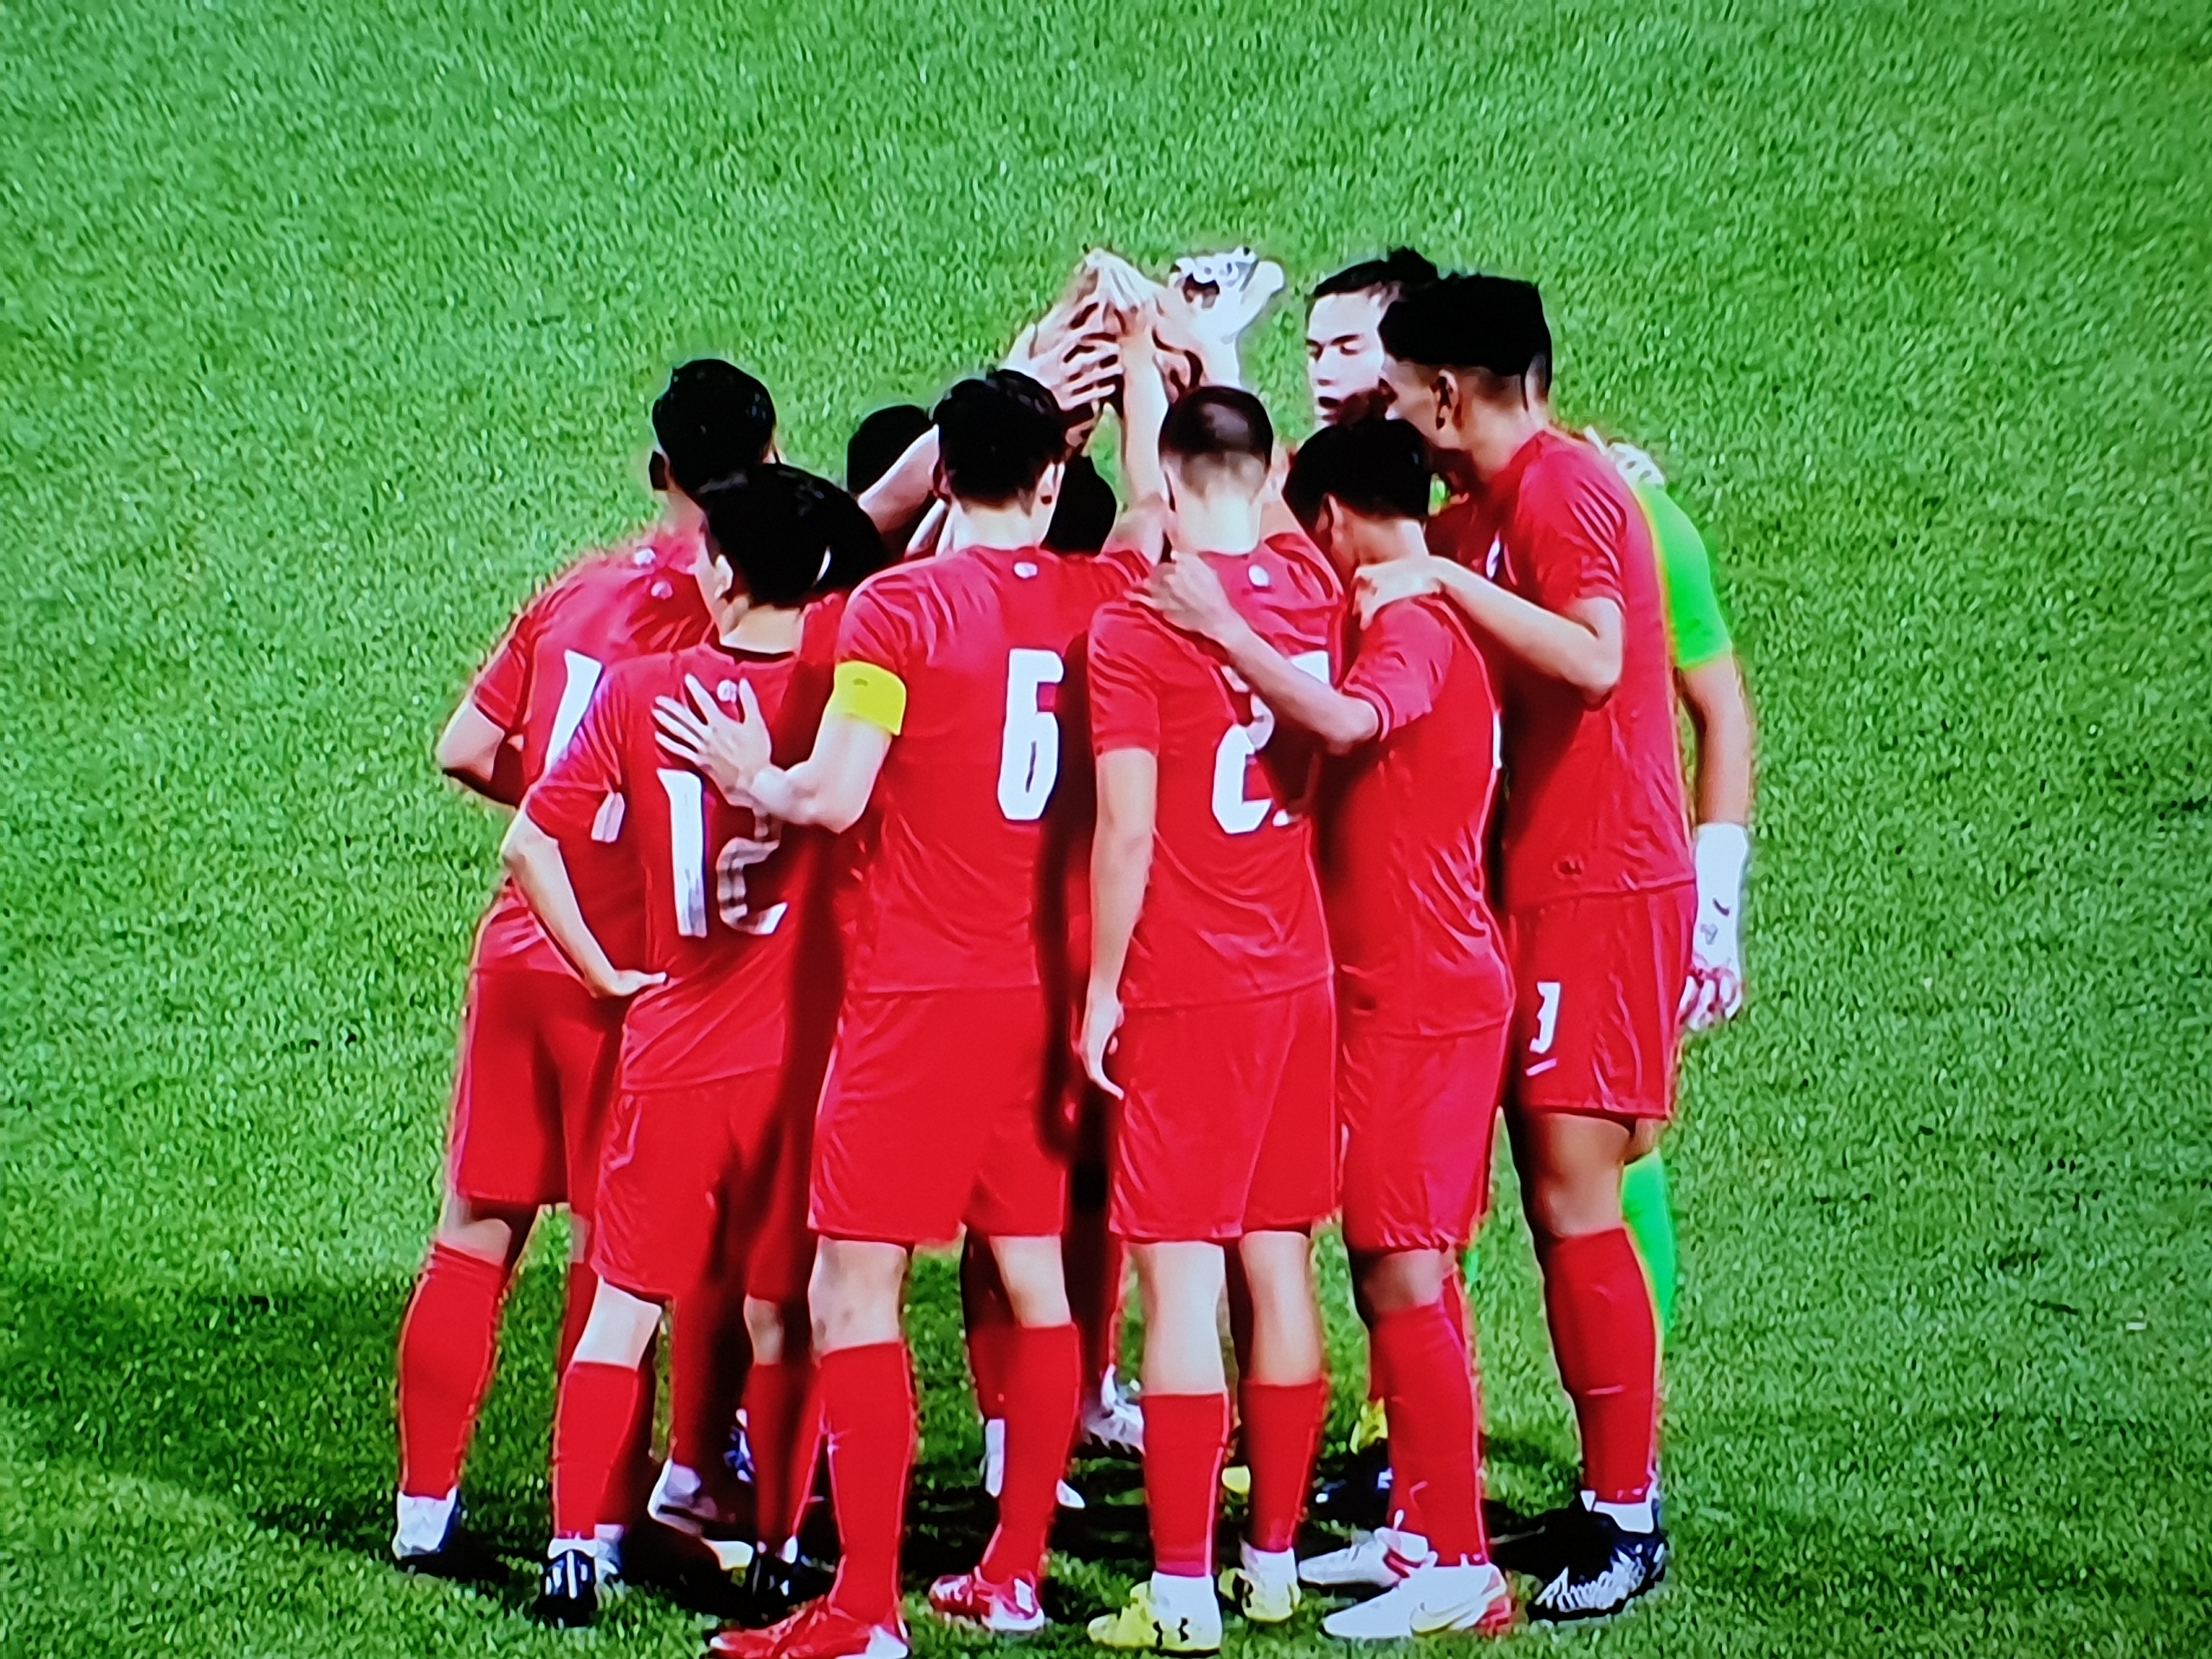 Singapore's Young Lions defeat Philippines 1-0 in AFC Under-23 Asian Cup qualifier!